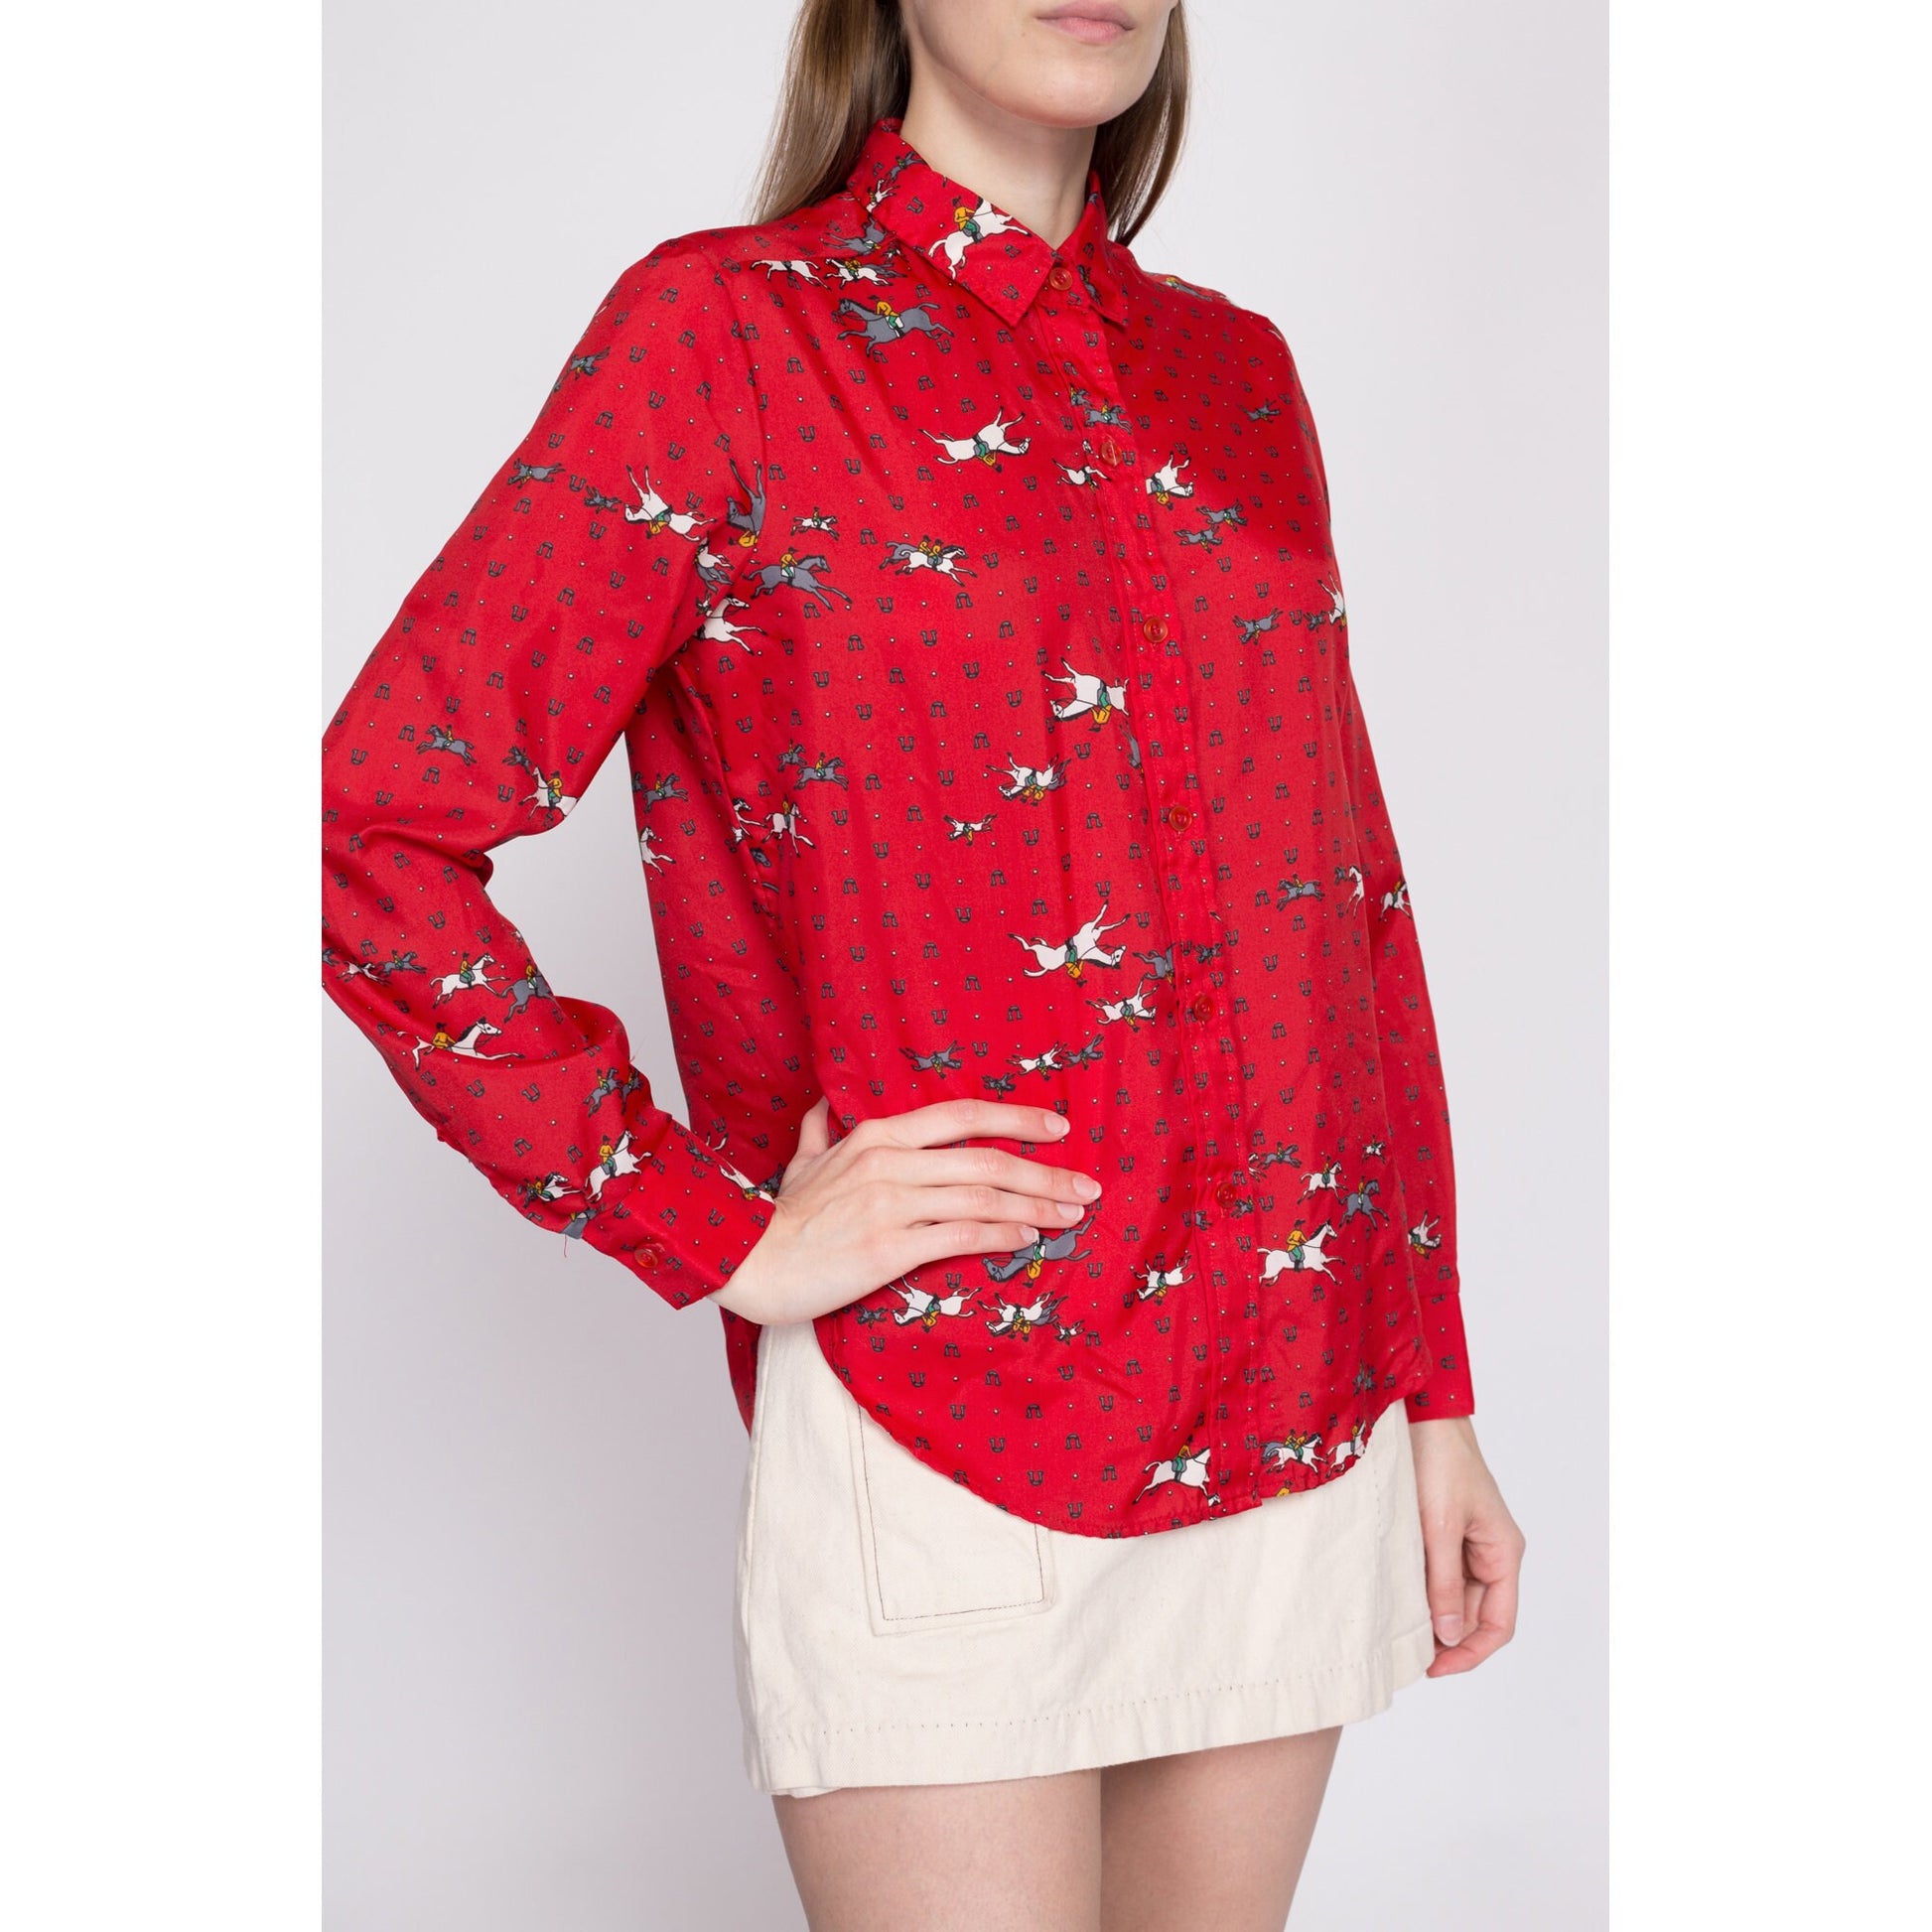 70s 80s Equestrian Novelty Print Top - Medium | Vintage Red Horse Graphic Long Sleeve Collared Button Up Shirt